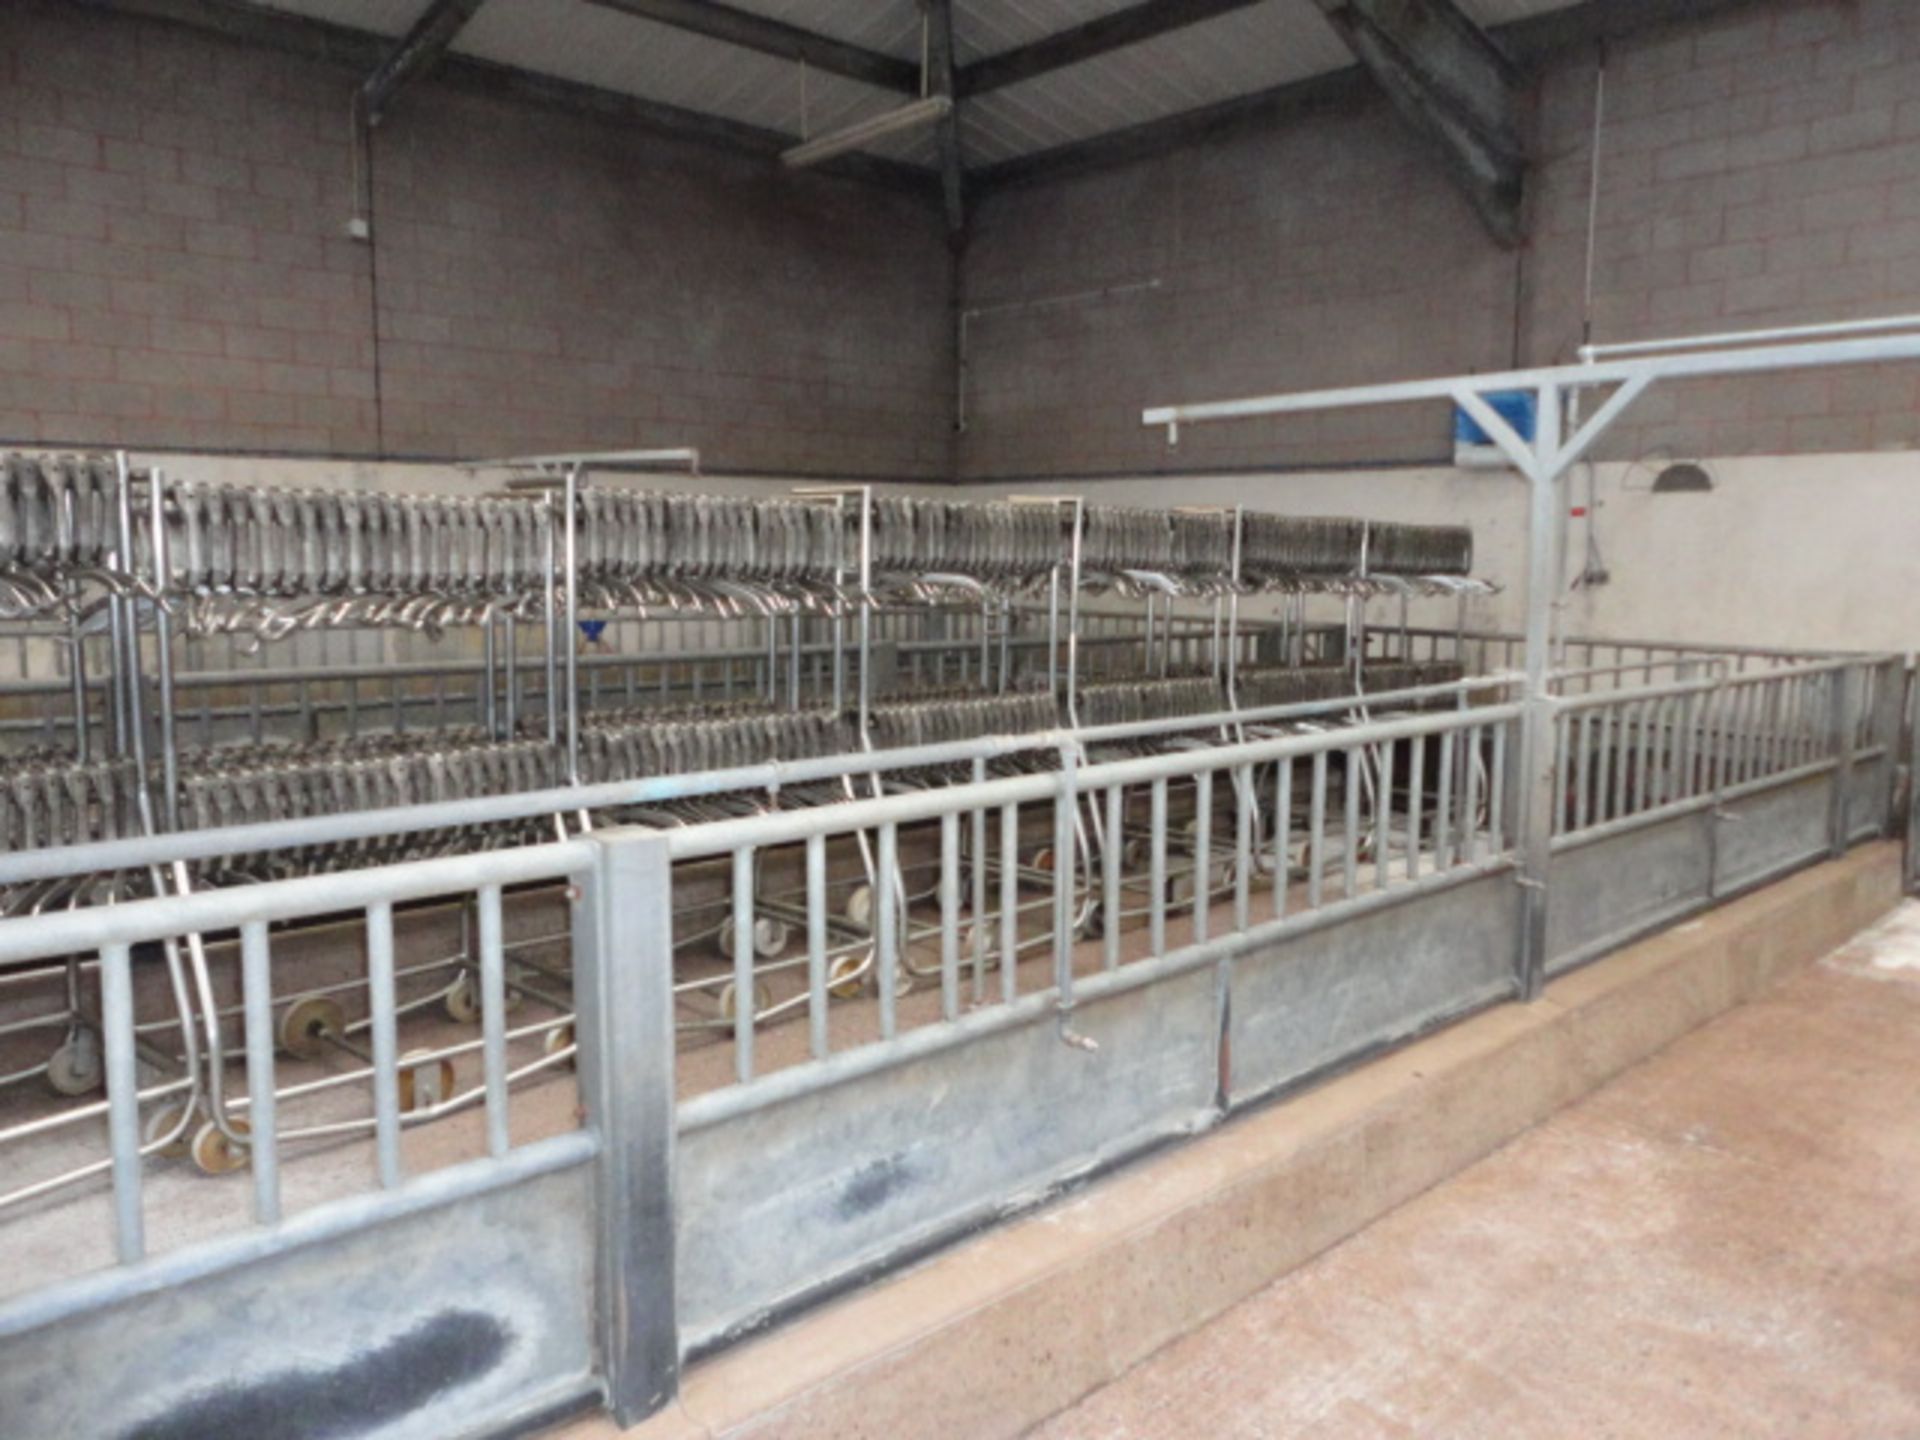 Lairage all steel work pens water sprays etc  The panels are 900mm x 2900mm 34 total, 6 900 x 650.